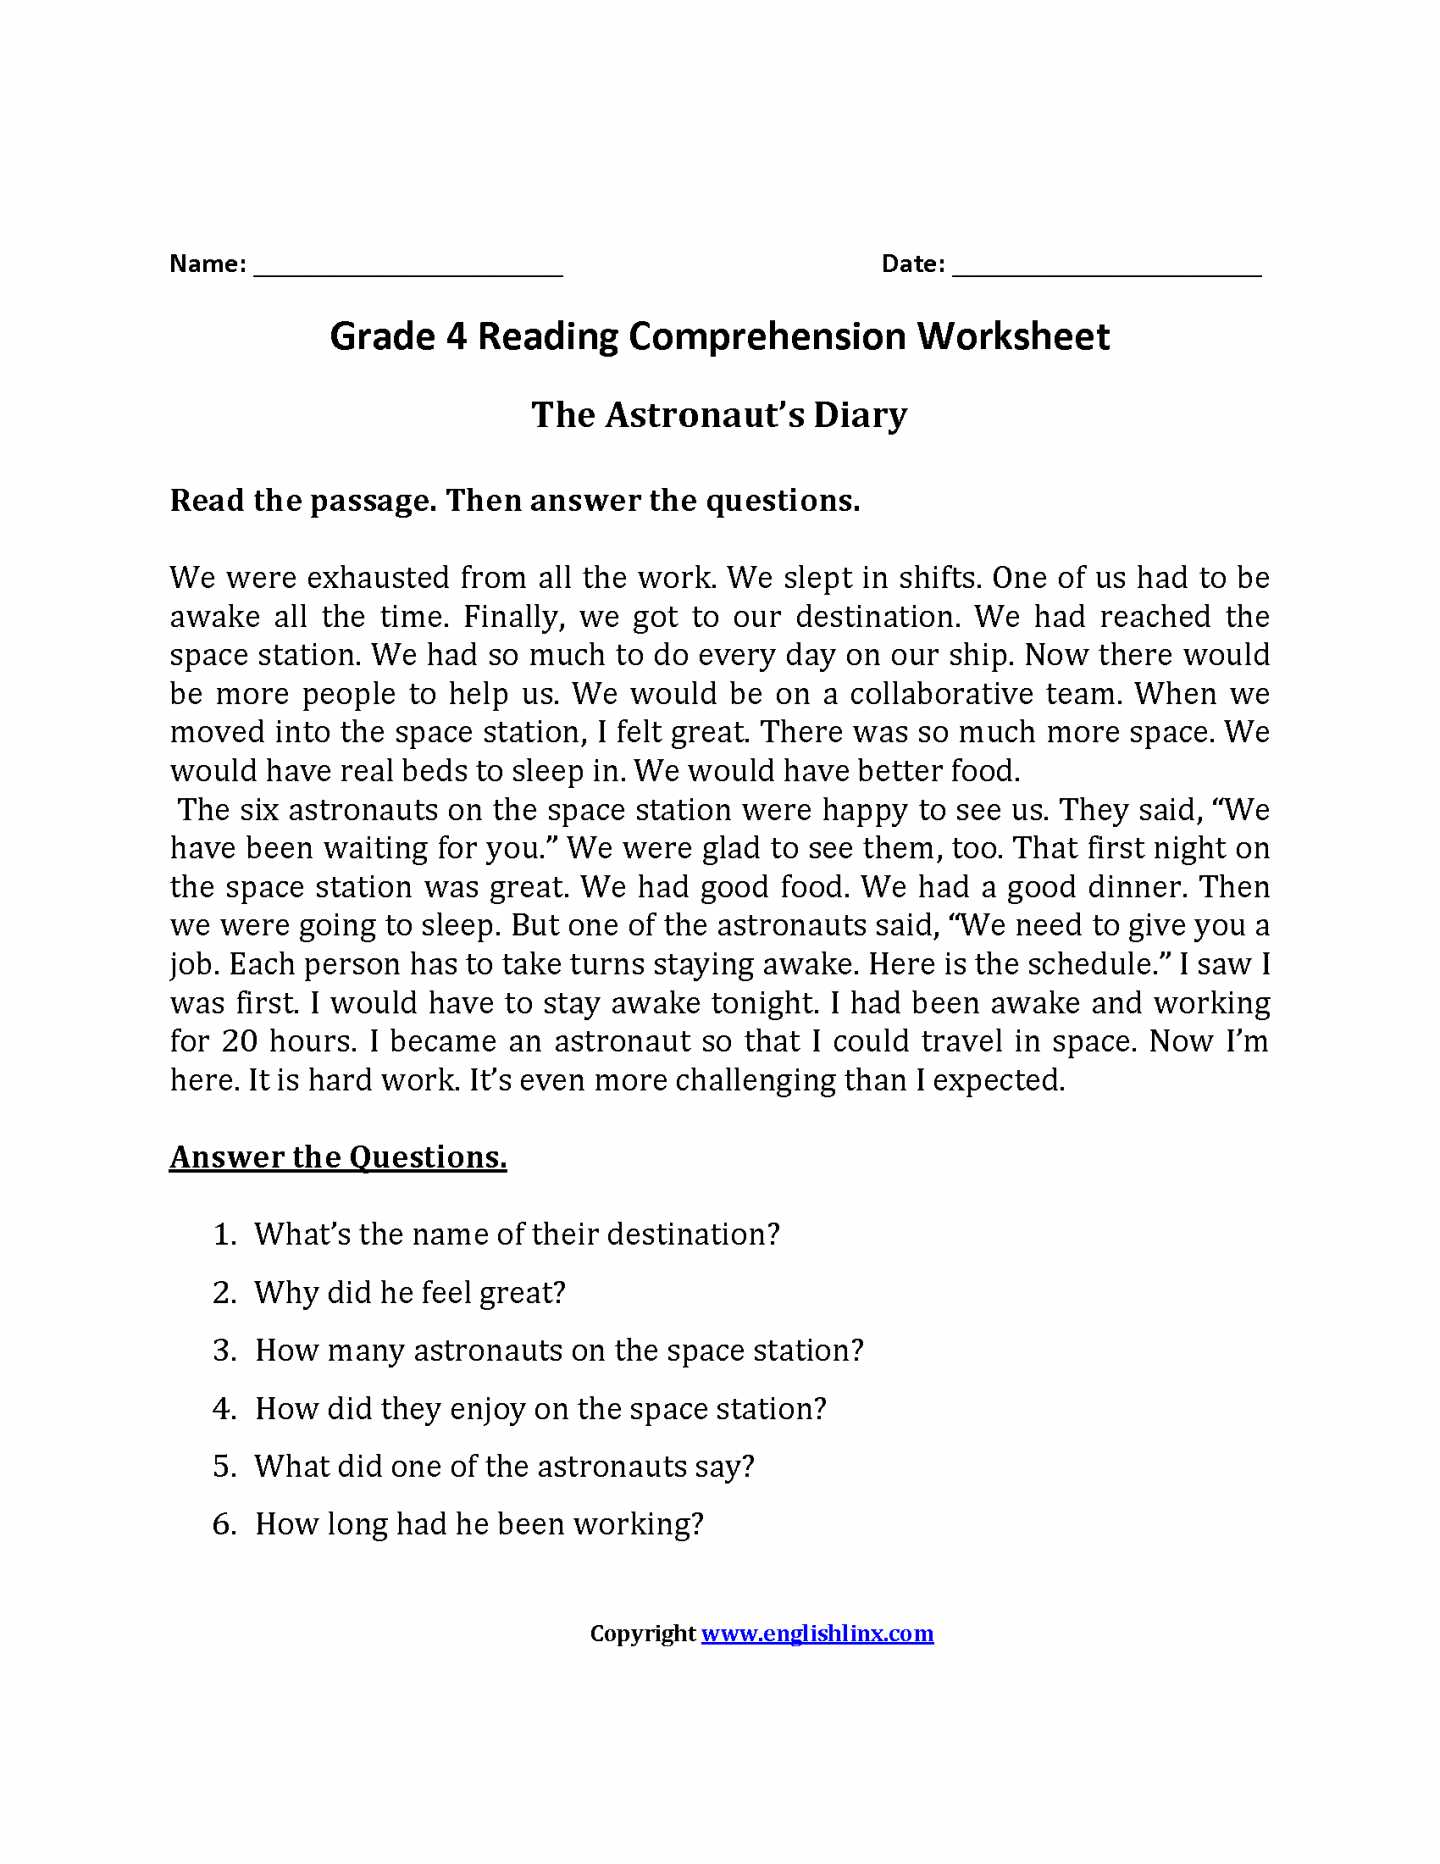 Free 1st Grade Comprehension Worksheets as Well as Reading Prehension Worksheets 1st Grade Multiple Choice